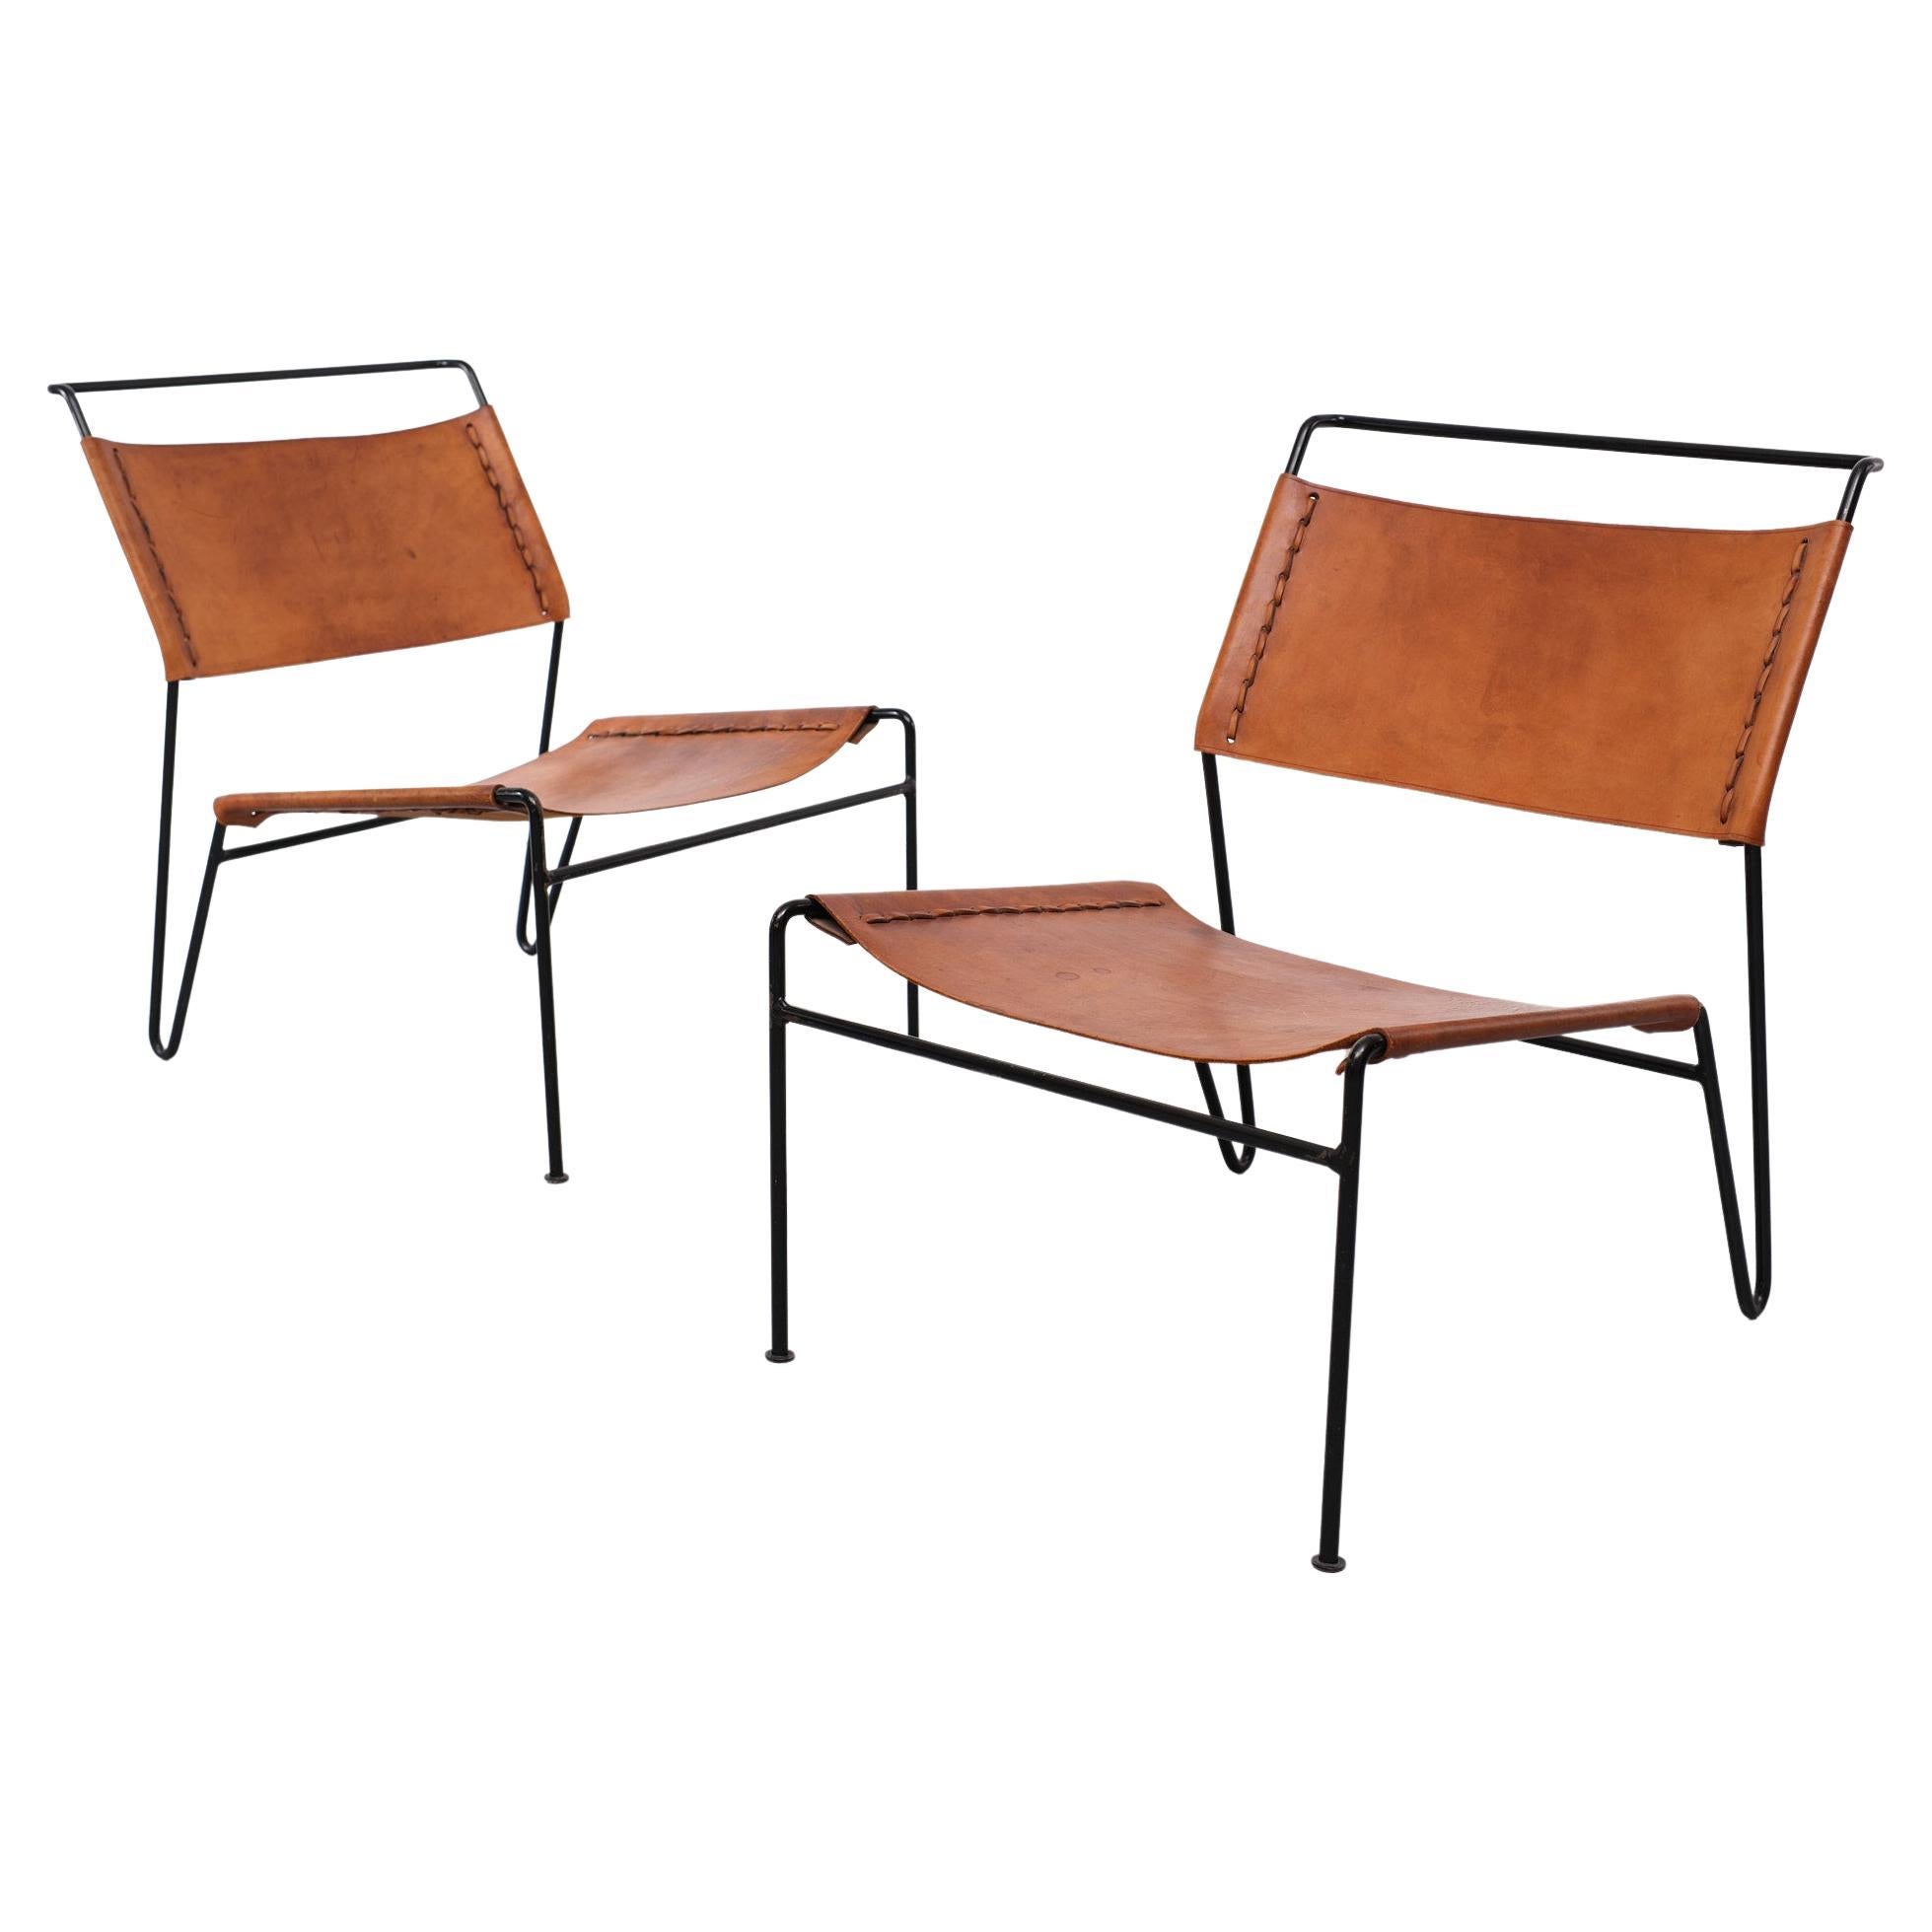 Pair of A. Dolleman Chairs for Metz & Co, Netherlands, 1950